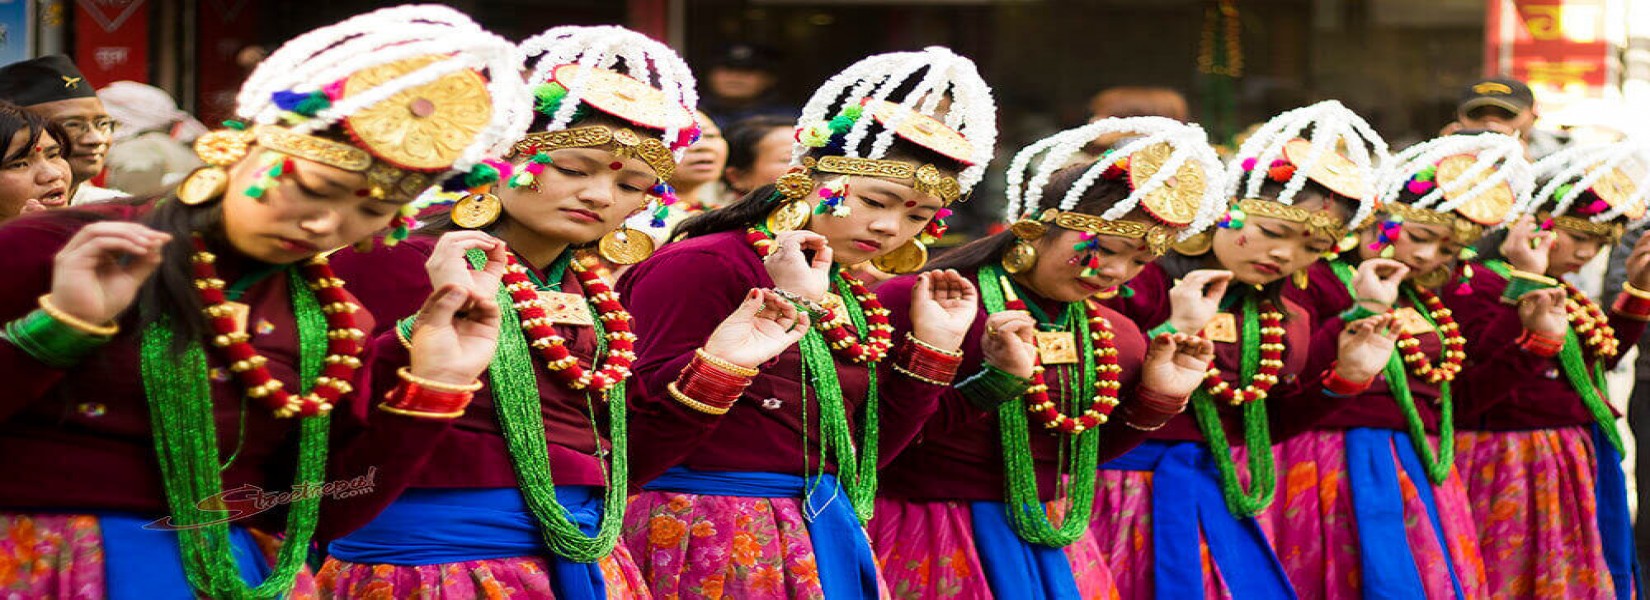 Gurung people and their culture